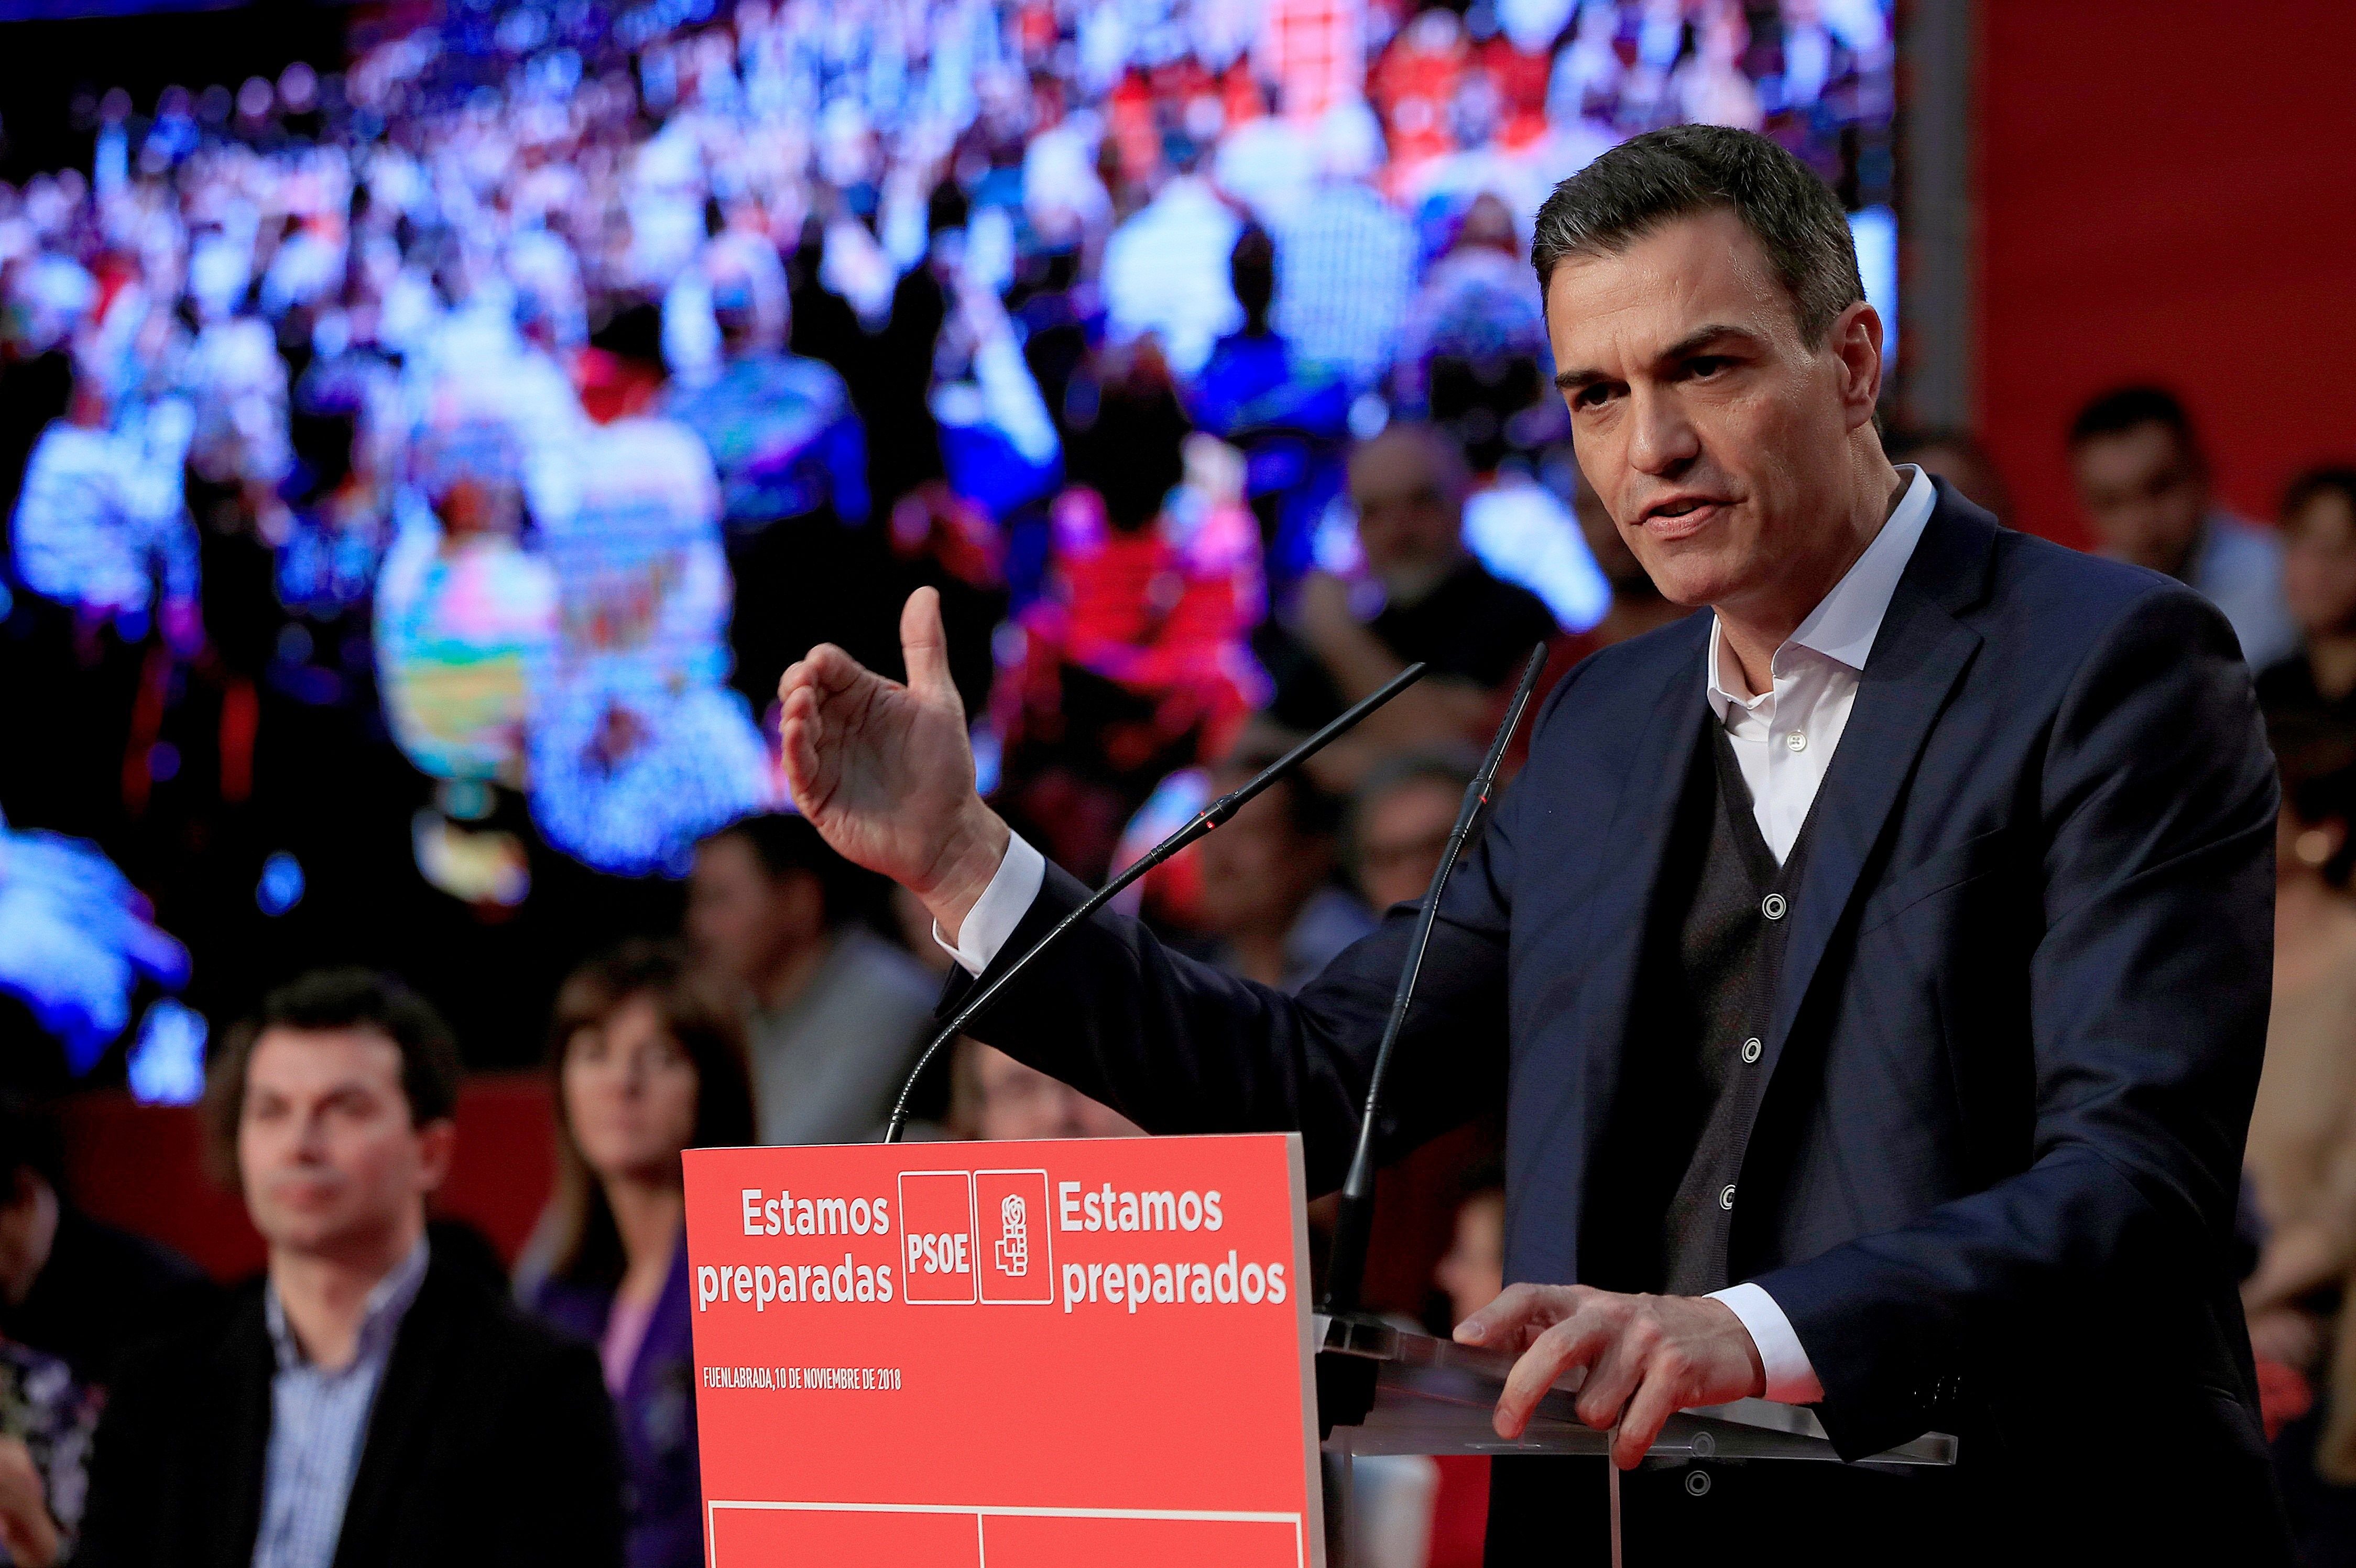 Poll, after Andalusian failure, now says PSOE would win in Spain